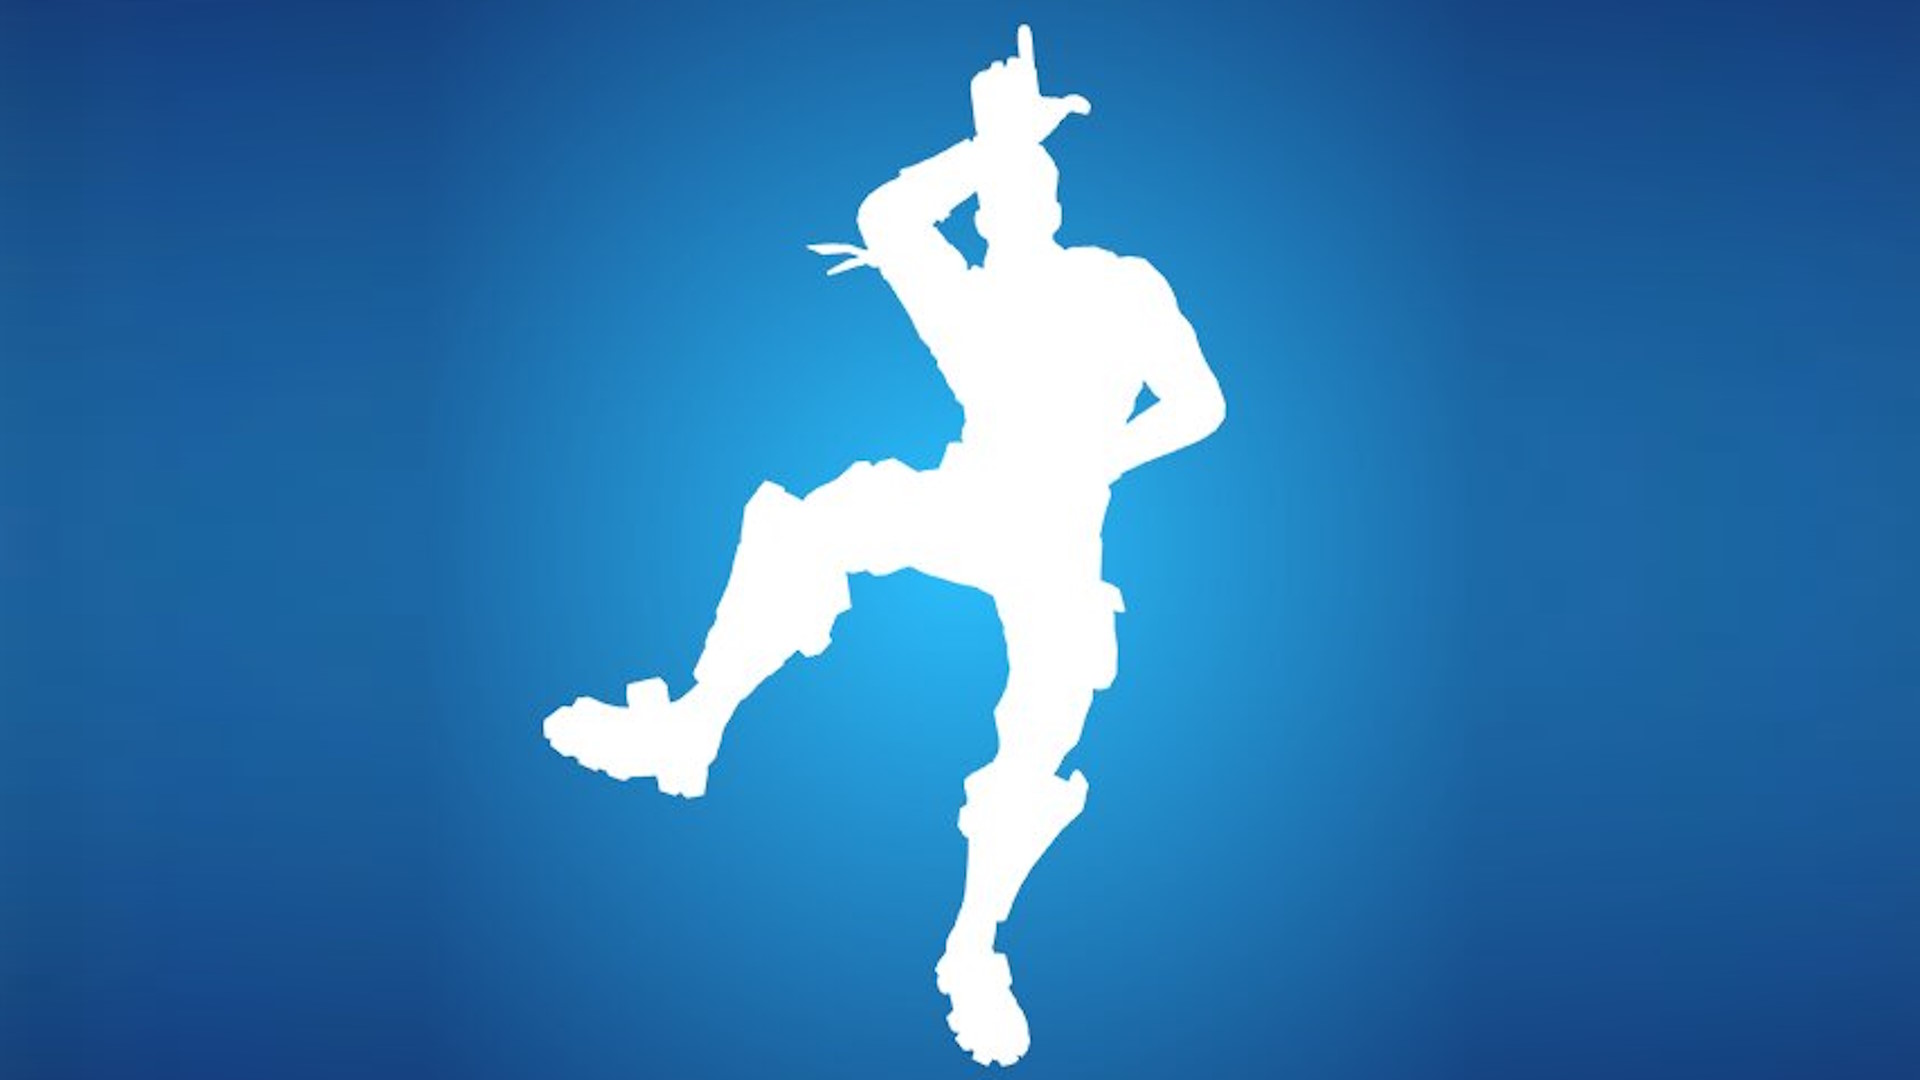  Fortnite is adding a toggle to disable 'confrontational emotes' including Laugh it Up and Take the L 